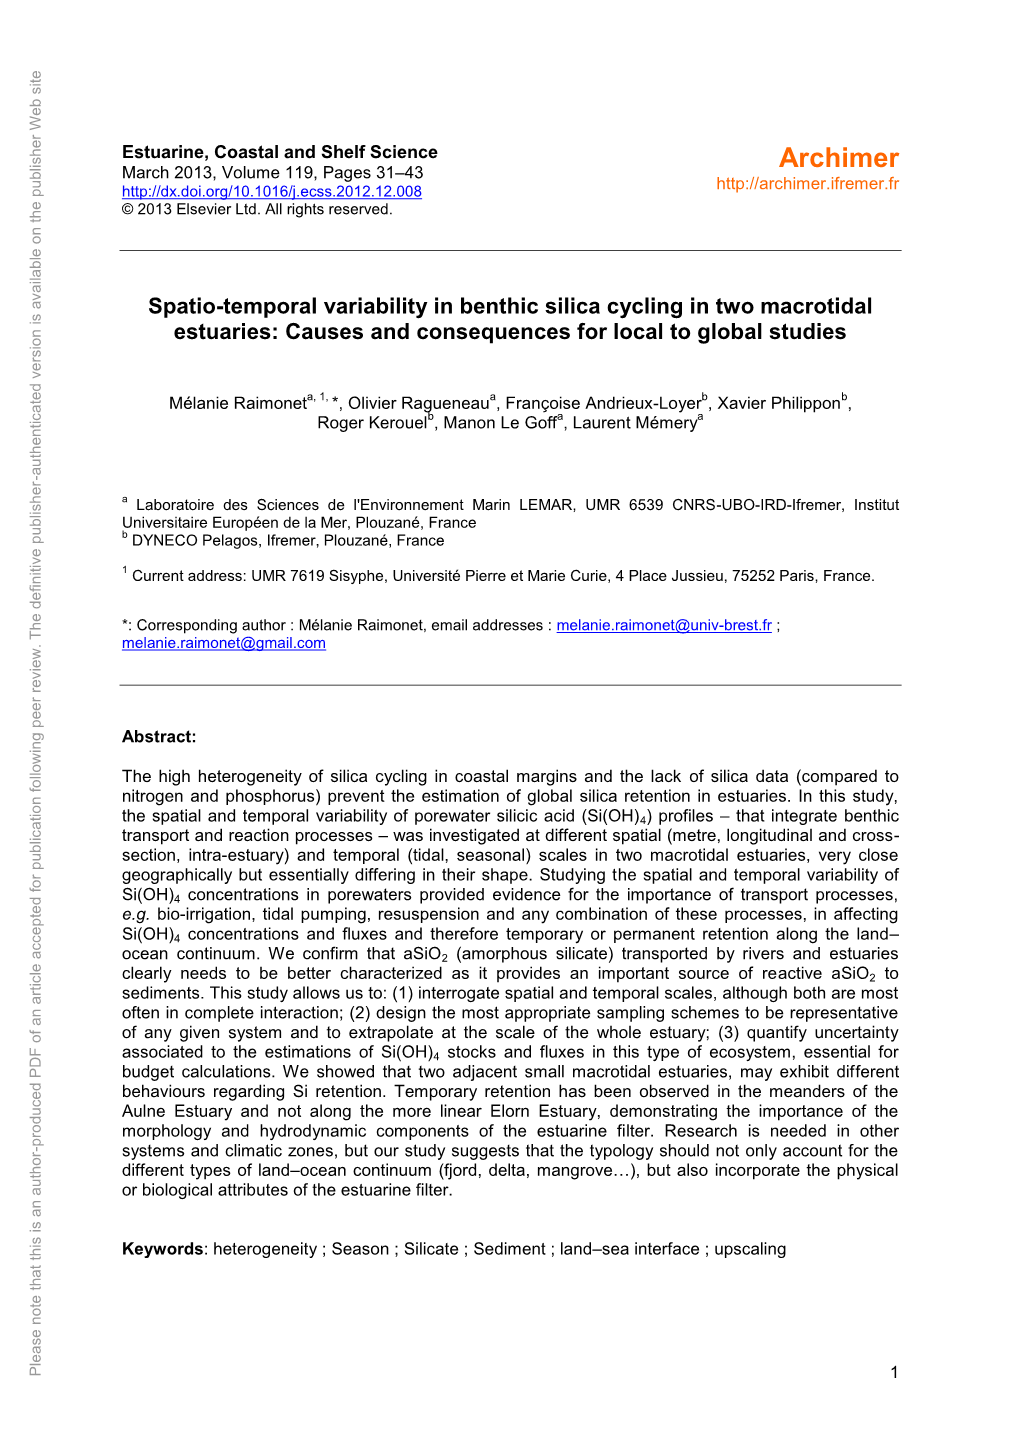 Spatio-Temporal Variability in Benthic Silica Cycling in Two Macrotidal Estuaries